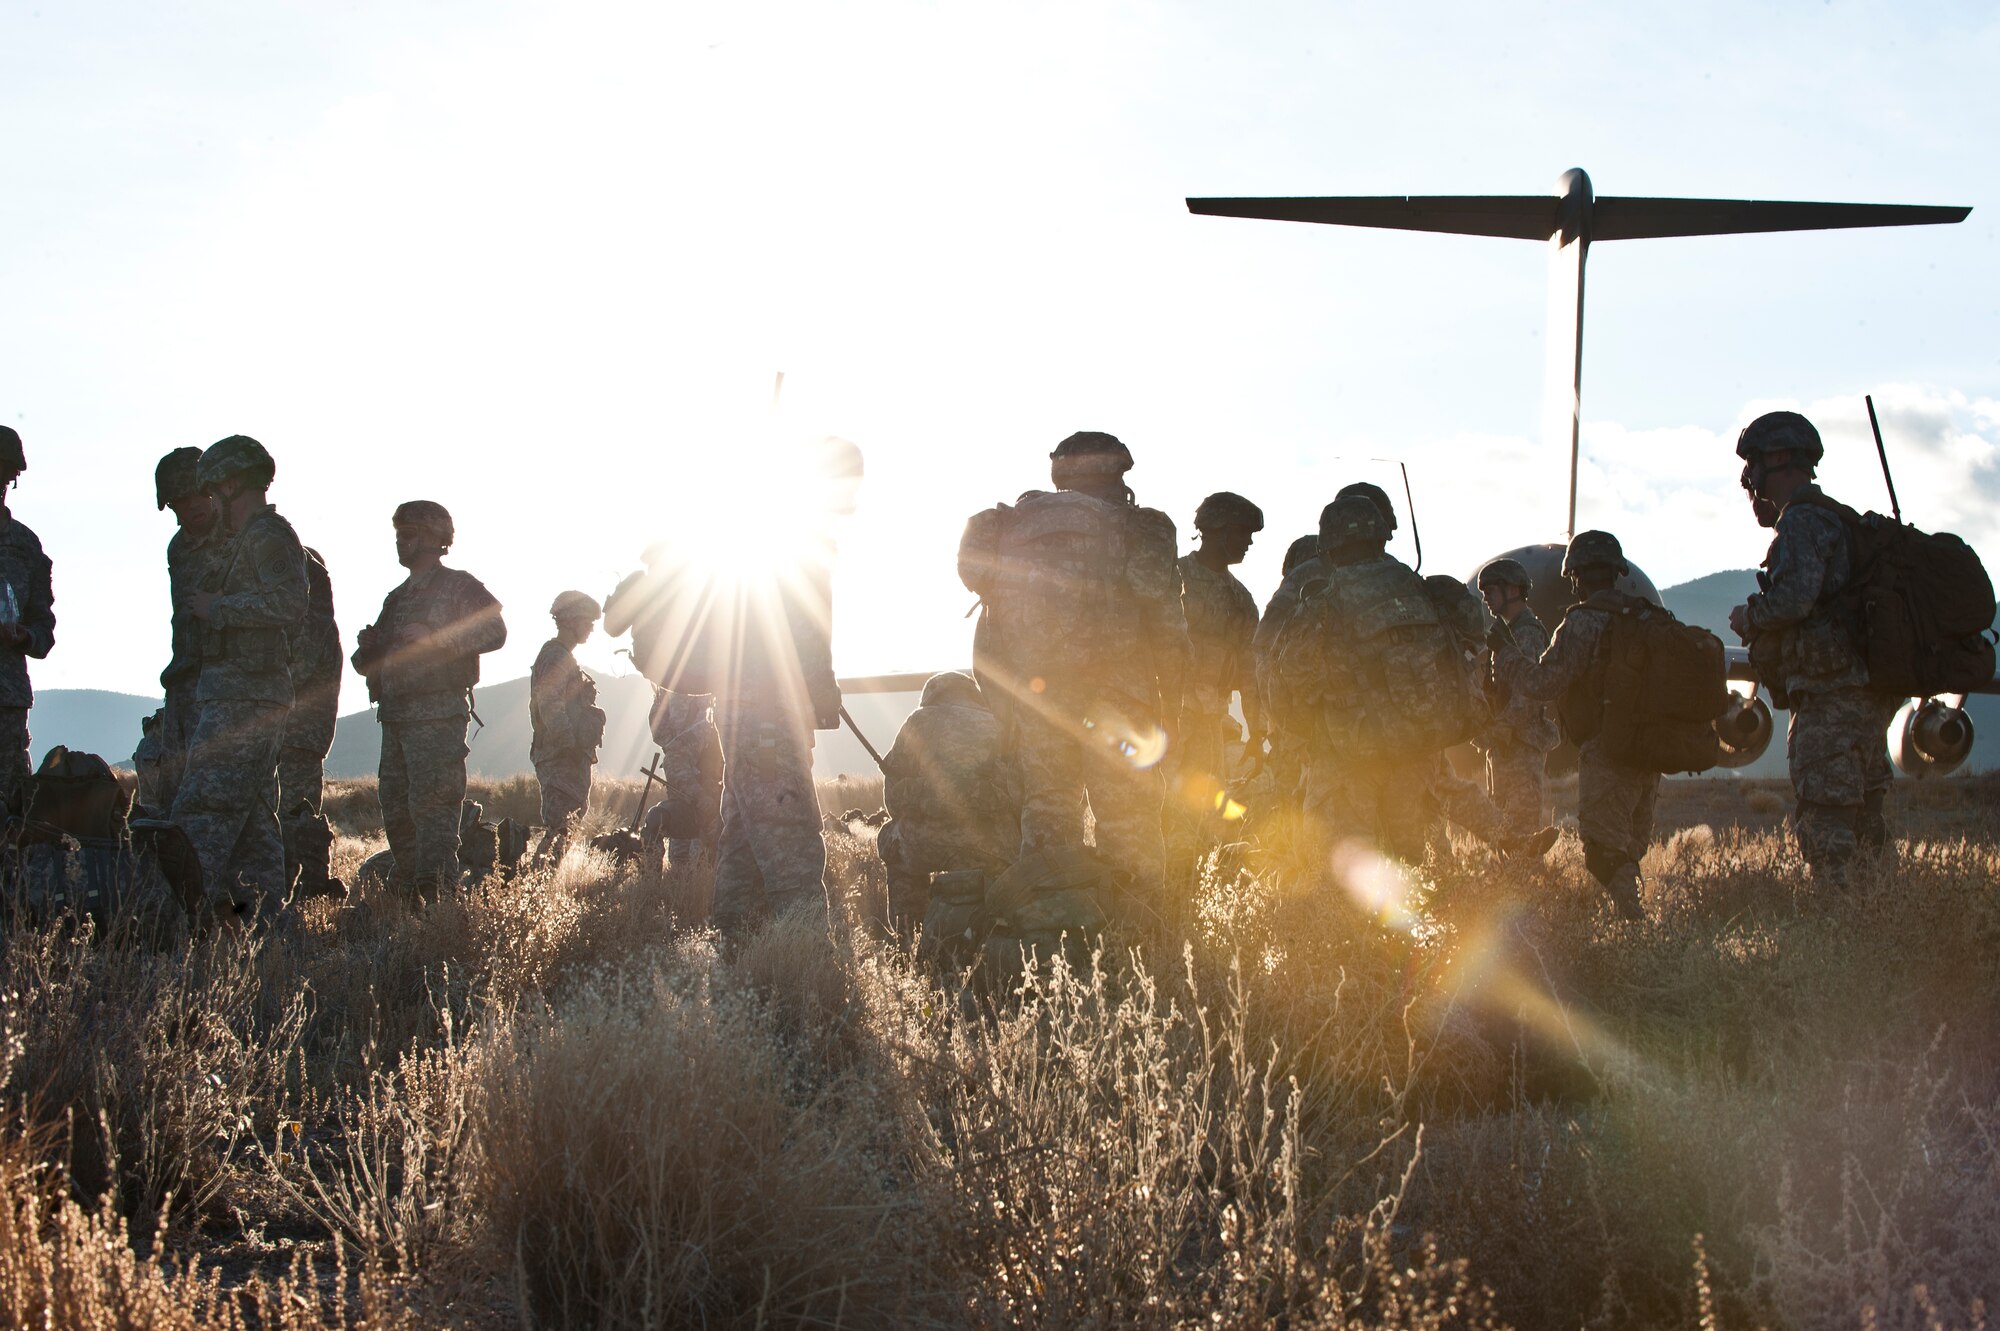 Paratroopers assigned to 3rd Brigade Combat Team, 82nd Airborne Division, Fort Bragg, N.C., gather at their rally point during the U.S. Air Force Weapons School's Joint Forcible Entry Exercise 14B on the Nevada Test and Training Range Dec. 6, 2014. Weapons school students must synchronize aircraft movements from geographically separated bases, command large formations of dissimilar aircraft in high-threat airspace, and tactically deliver and recover combat forces via air drops and combat landings on an unimproved landing strip. (U.S. Air Force photo by Staff Sgt. Victoria Sneed)